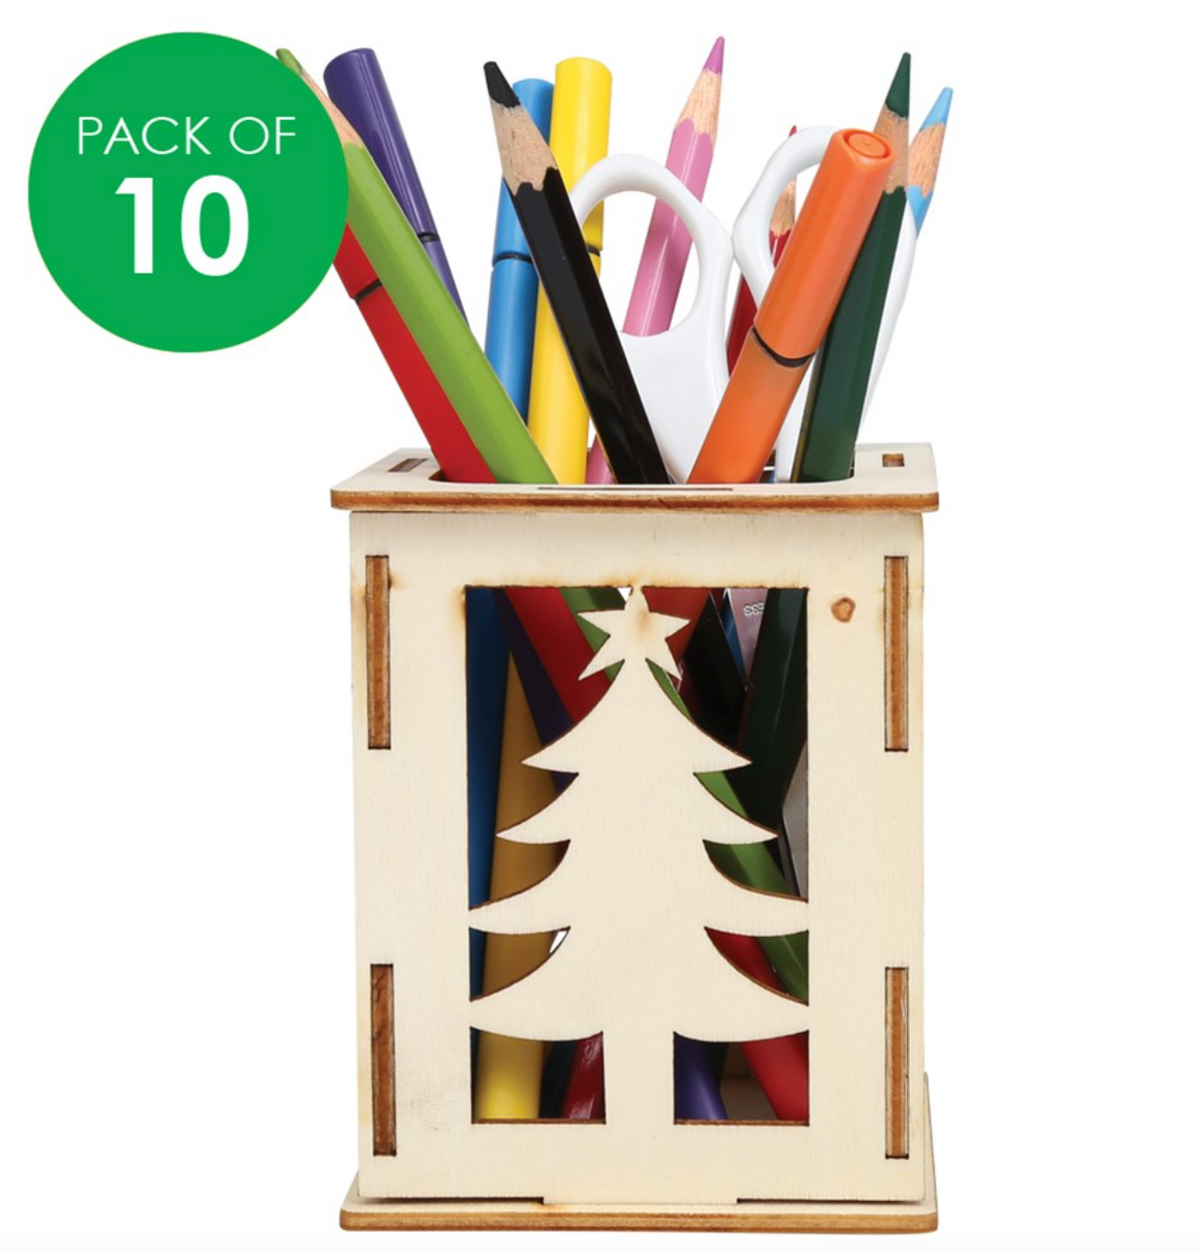 Wooden Christmas Holders - Pack of 10